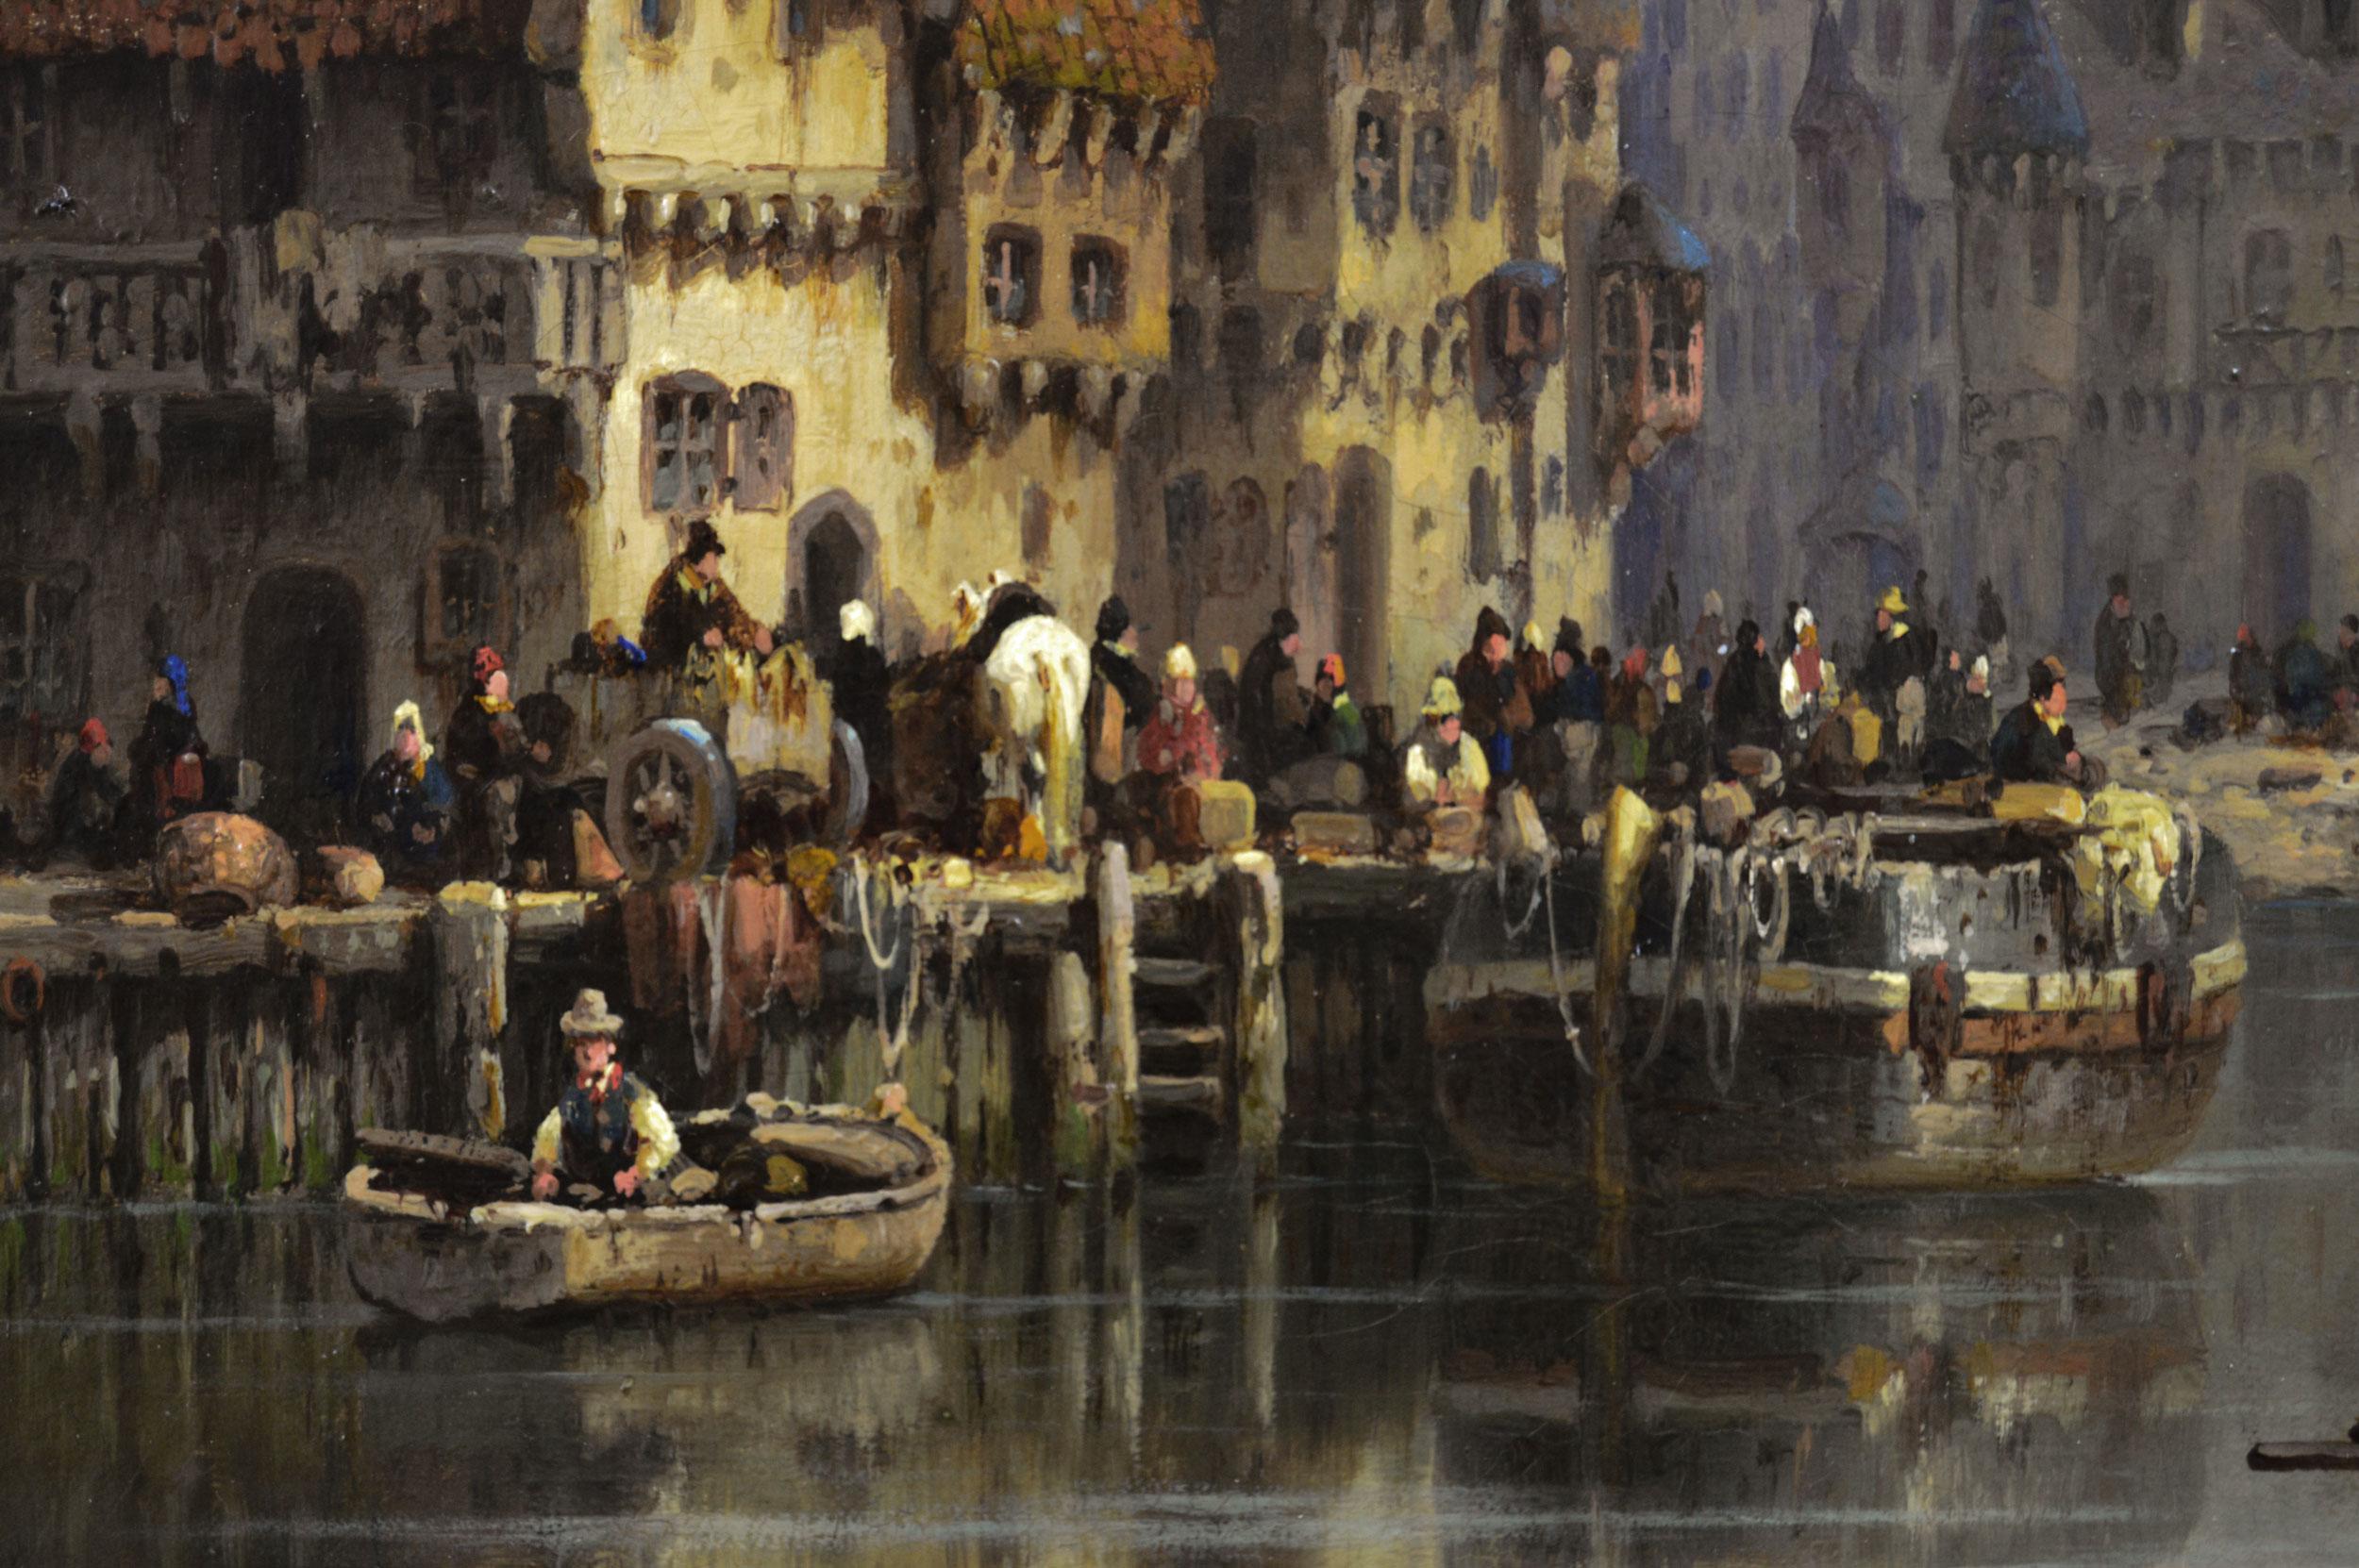 19th Century continental townscape oil painting of a quayside on a river - Brown Figurative Painting by Ludwig Hermann